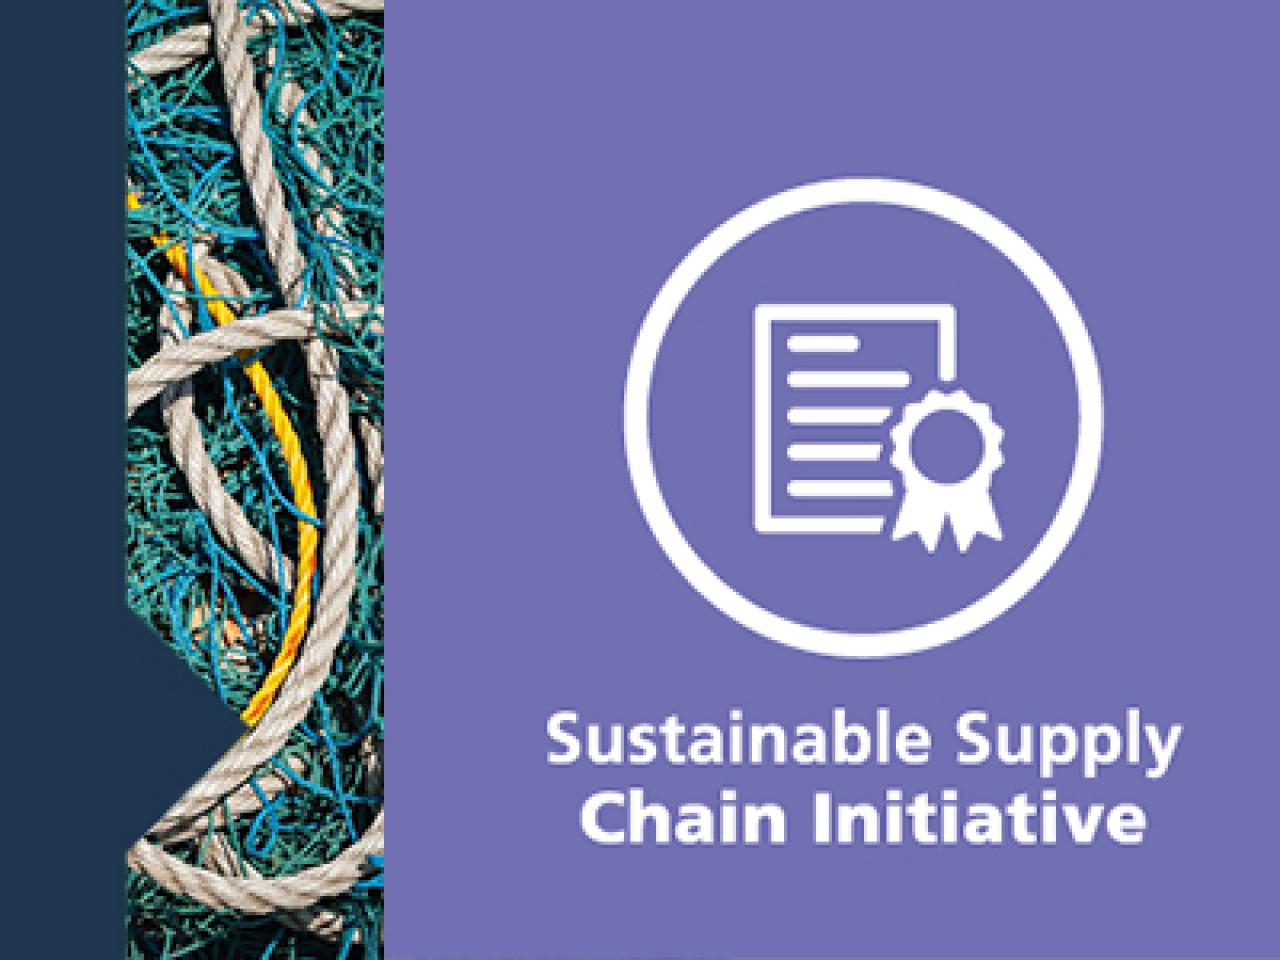 "Sustainable Supply Chain Initiative"